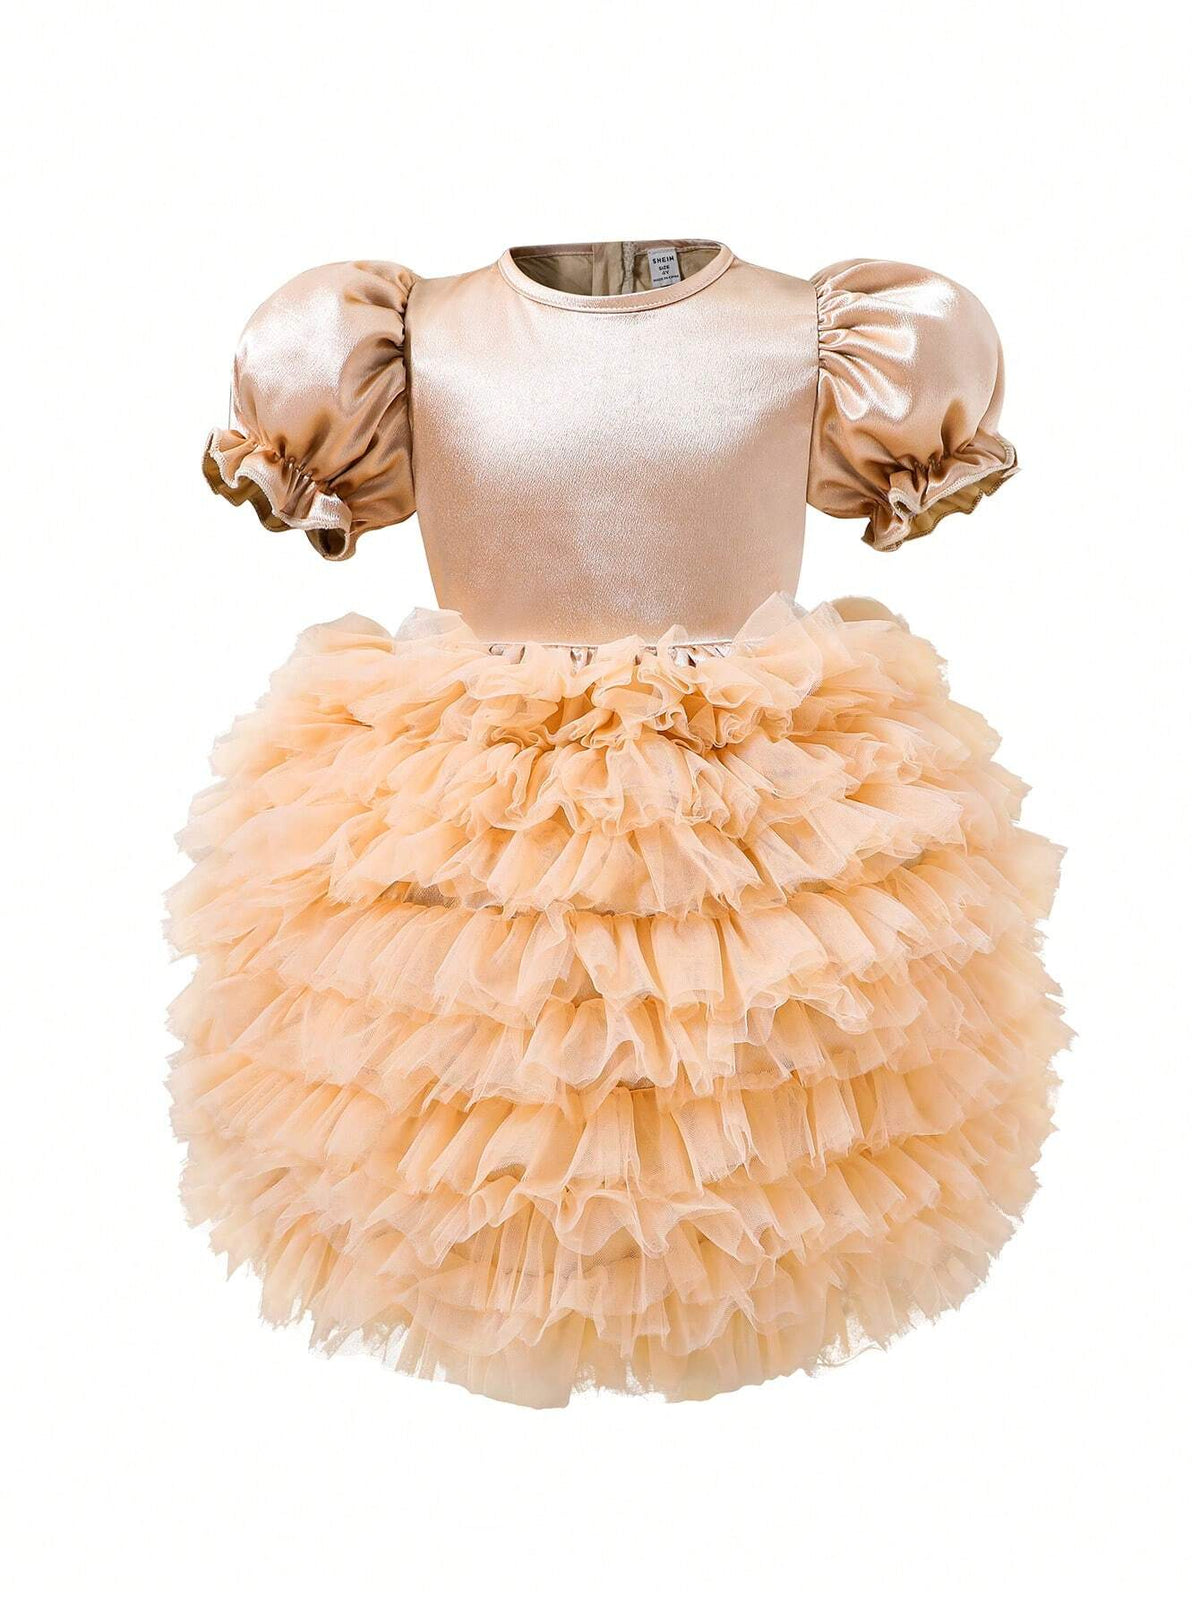 Young Girl Gorgeous Elegant Tutu Dress In Champagne Color Contrast Mesh Dress Perfect For Formal Occasions